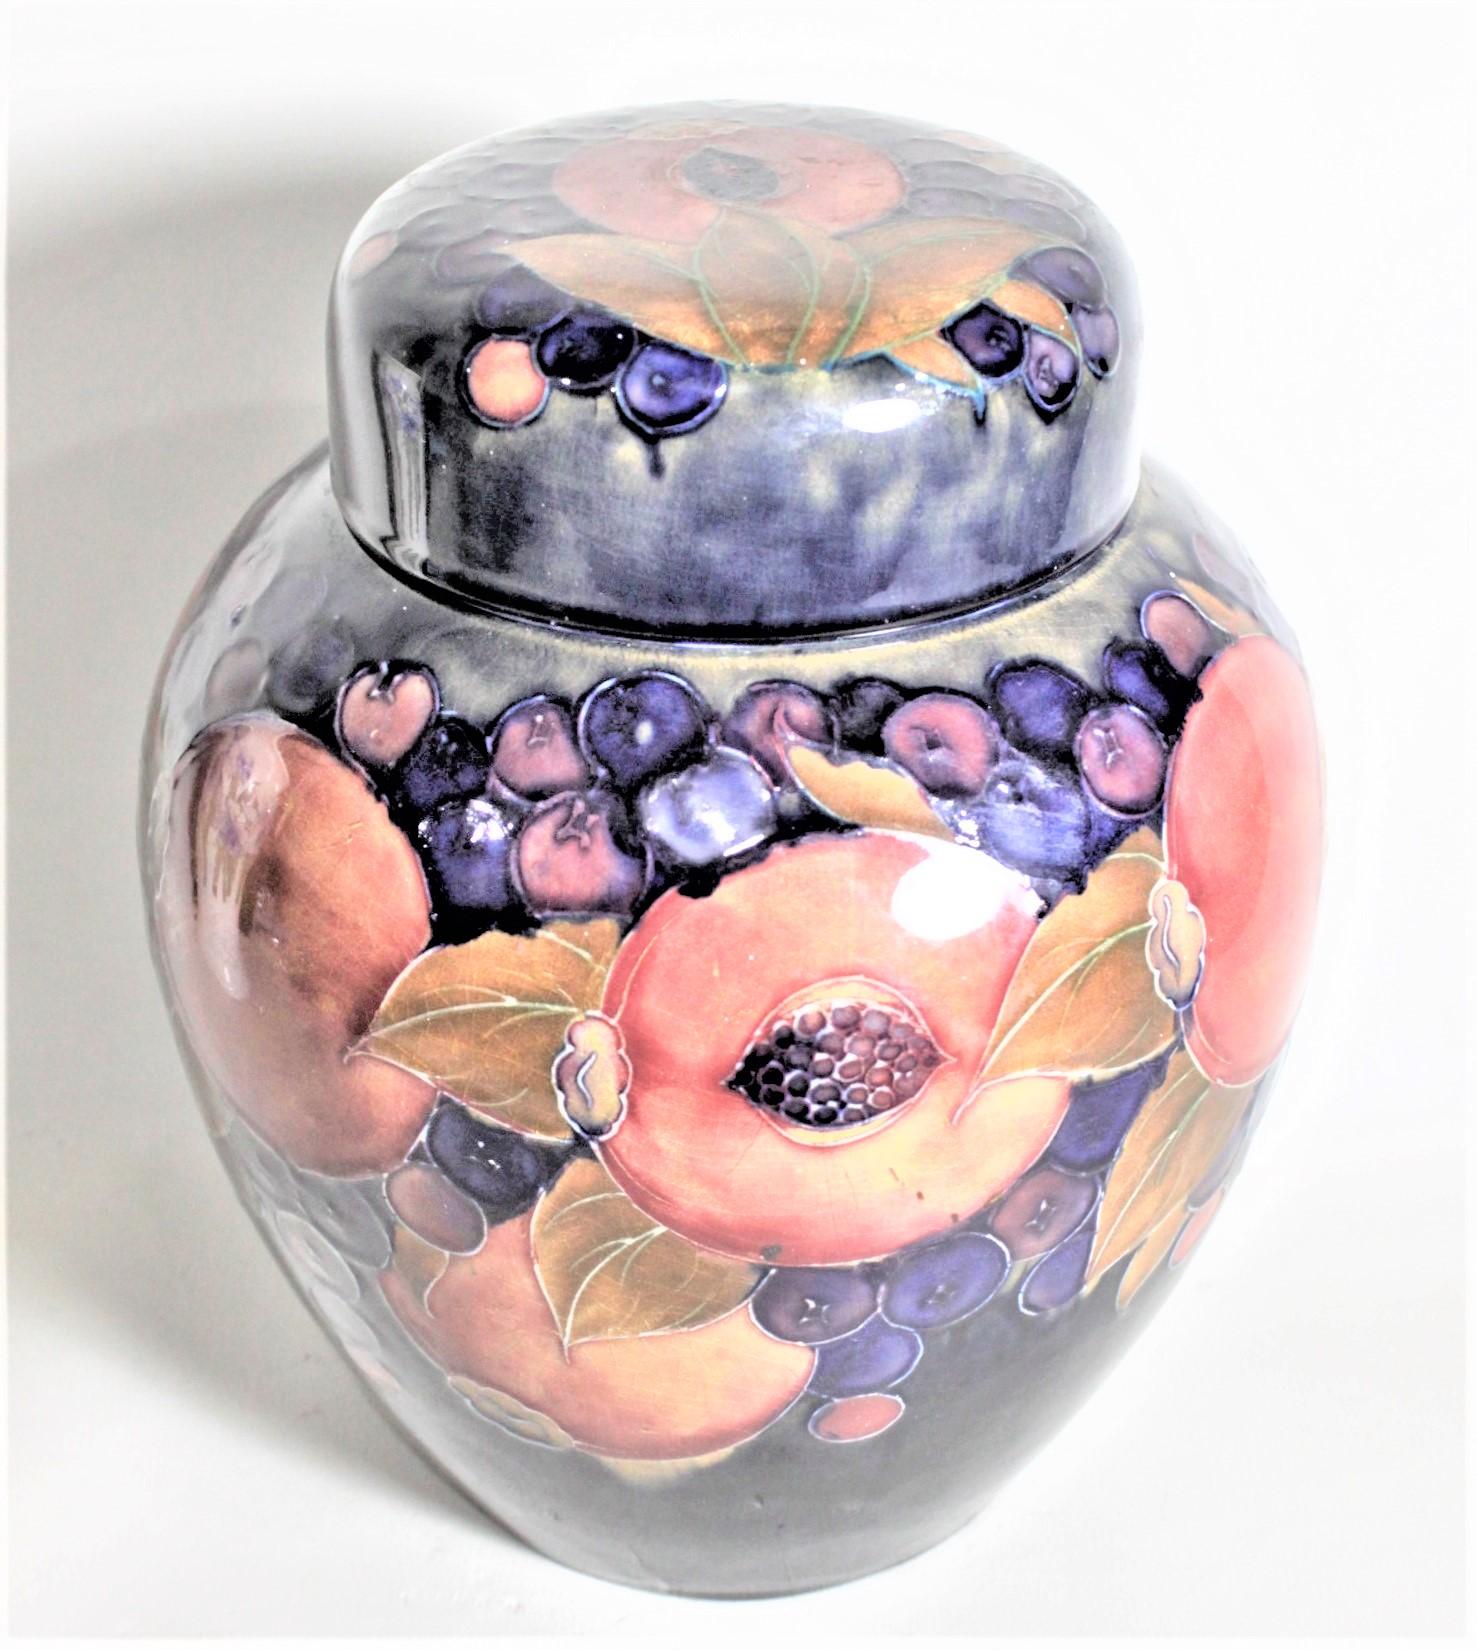 This large lidded ginger jar was made by the Moorcroft Pottery company of England in circa 1935 with the pomegranate patterned glaze. This art pottery lidded jar is done with a deep cobalt blue ground with a series of pomegranates and berries around